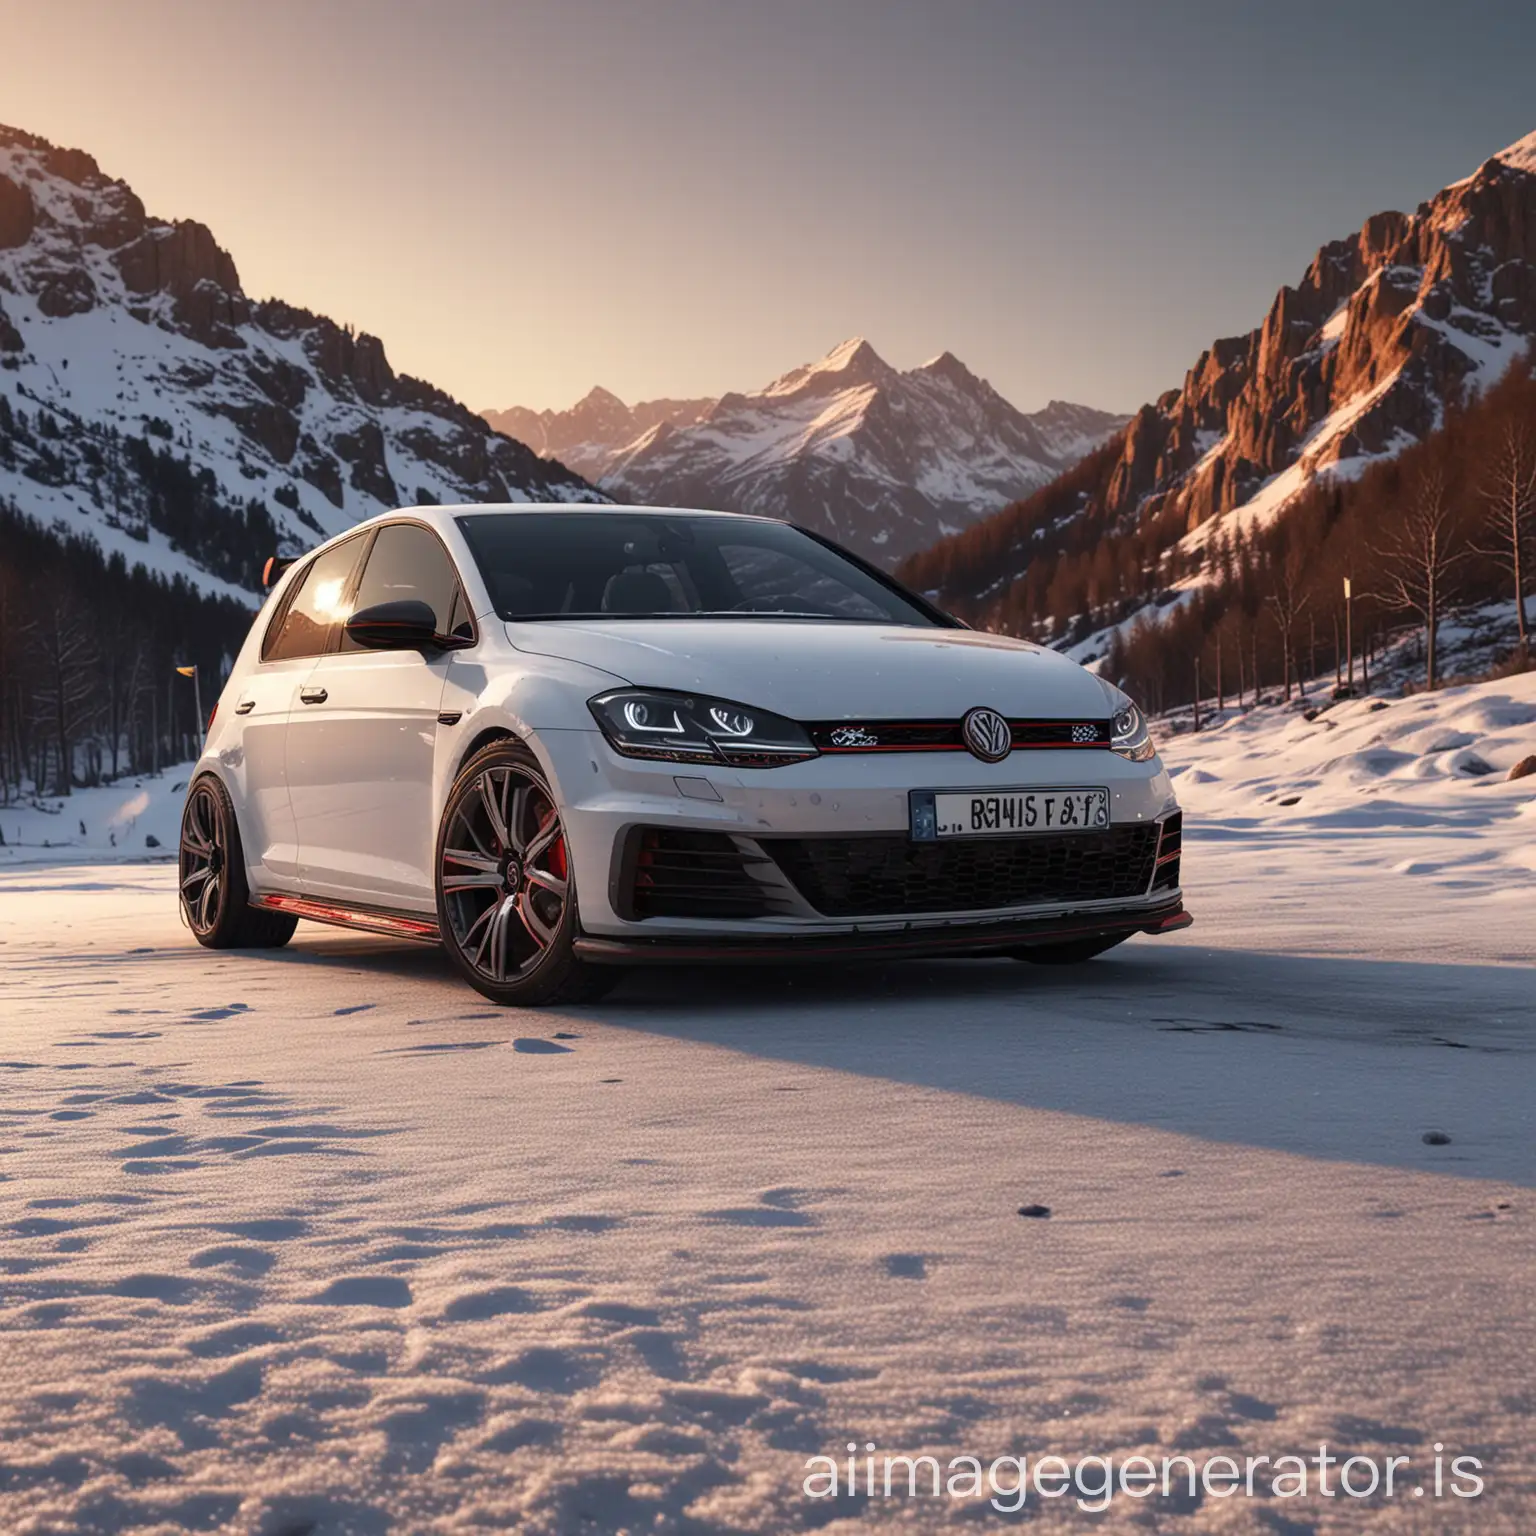 White-Golf-GTI-at-Sunset-in-Snowy-Mountain-Landscape